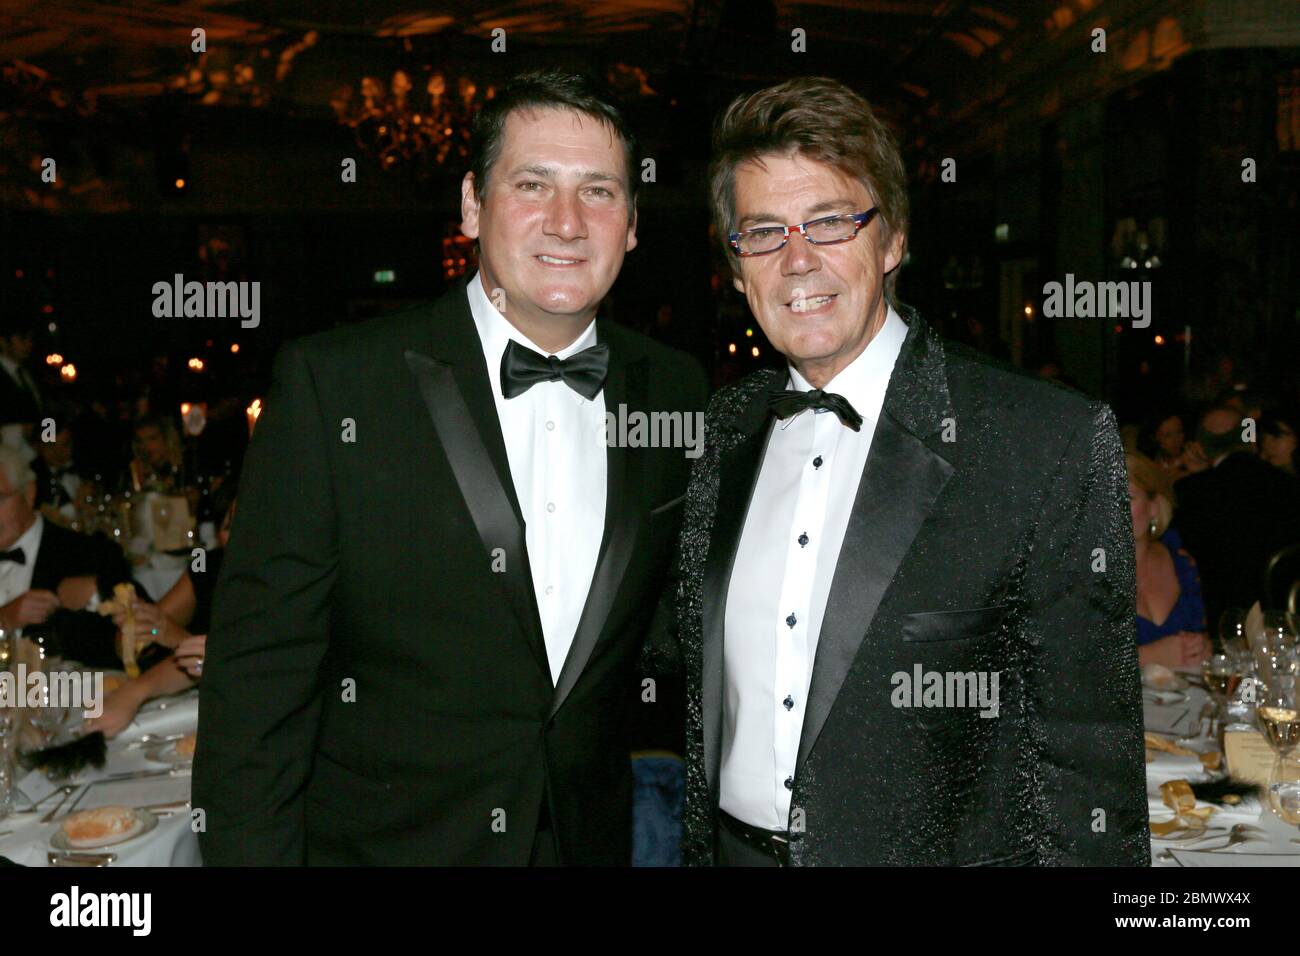 Singer Tony Hadley and Radio presenter Mike Read at a charity event in the Grosvenor Hotel, London England 2012. Stock Photo